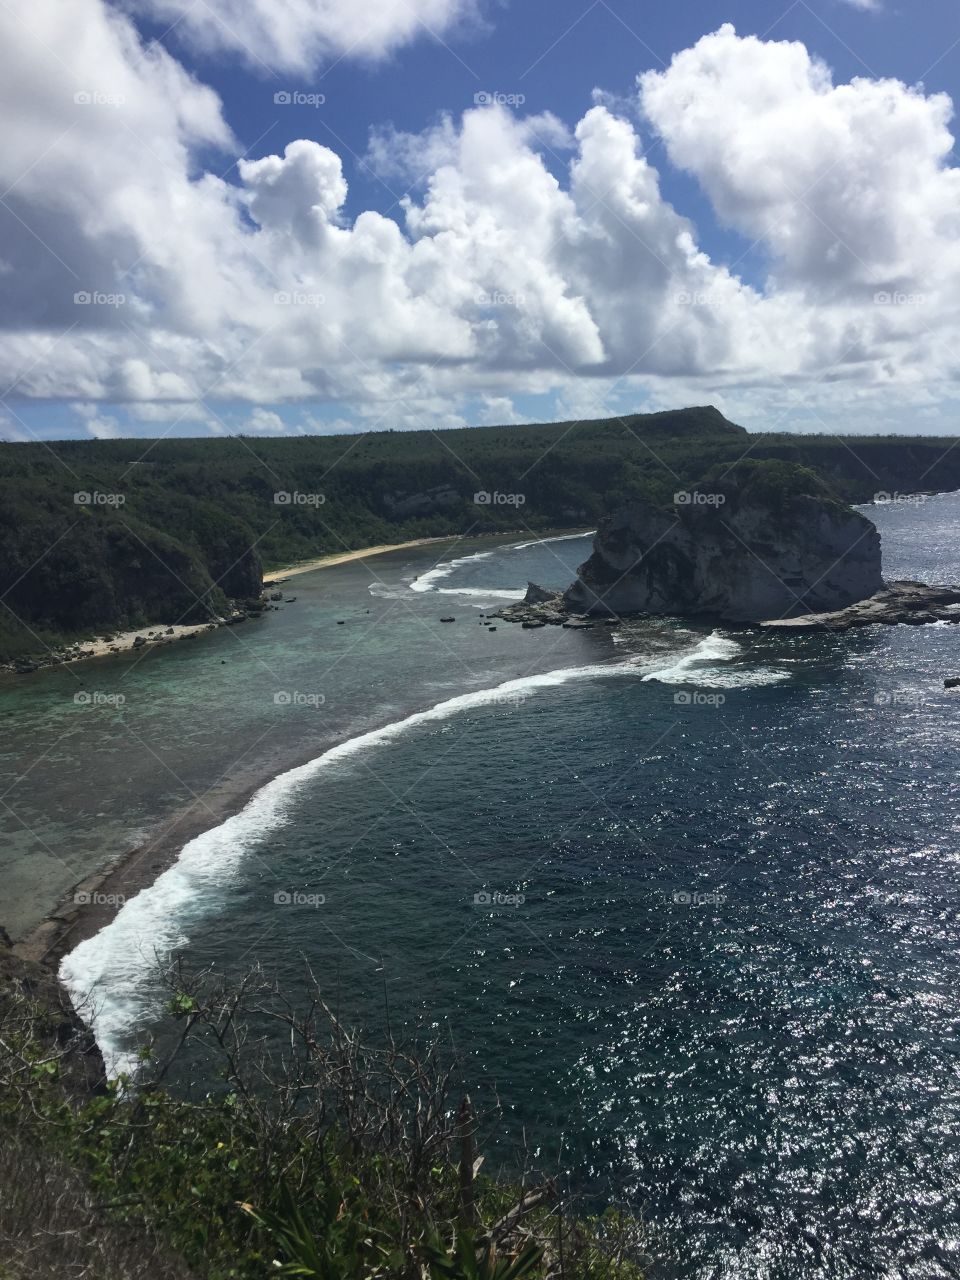 The view of Bird Island from the Bird Island lookout point on Saipan, CNMI.